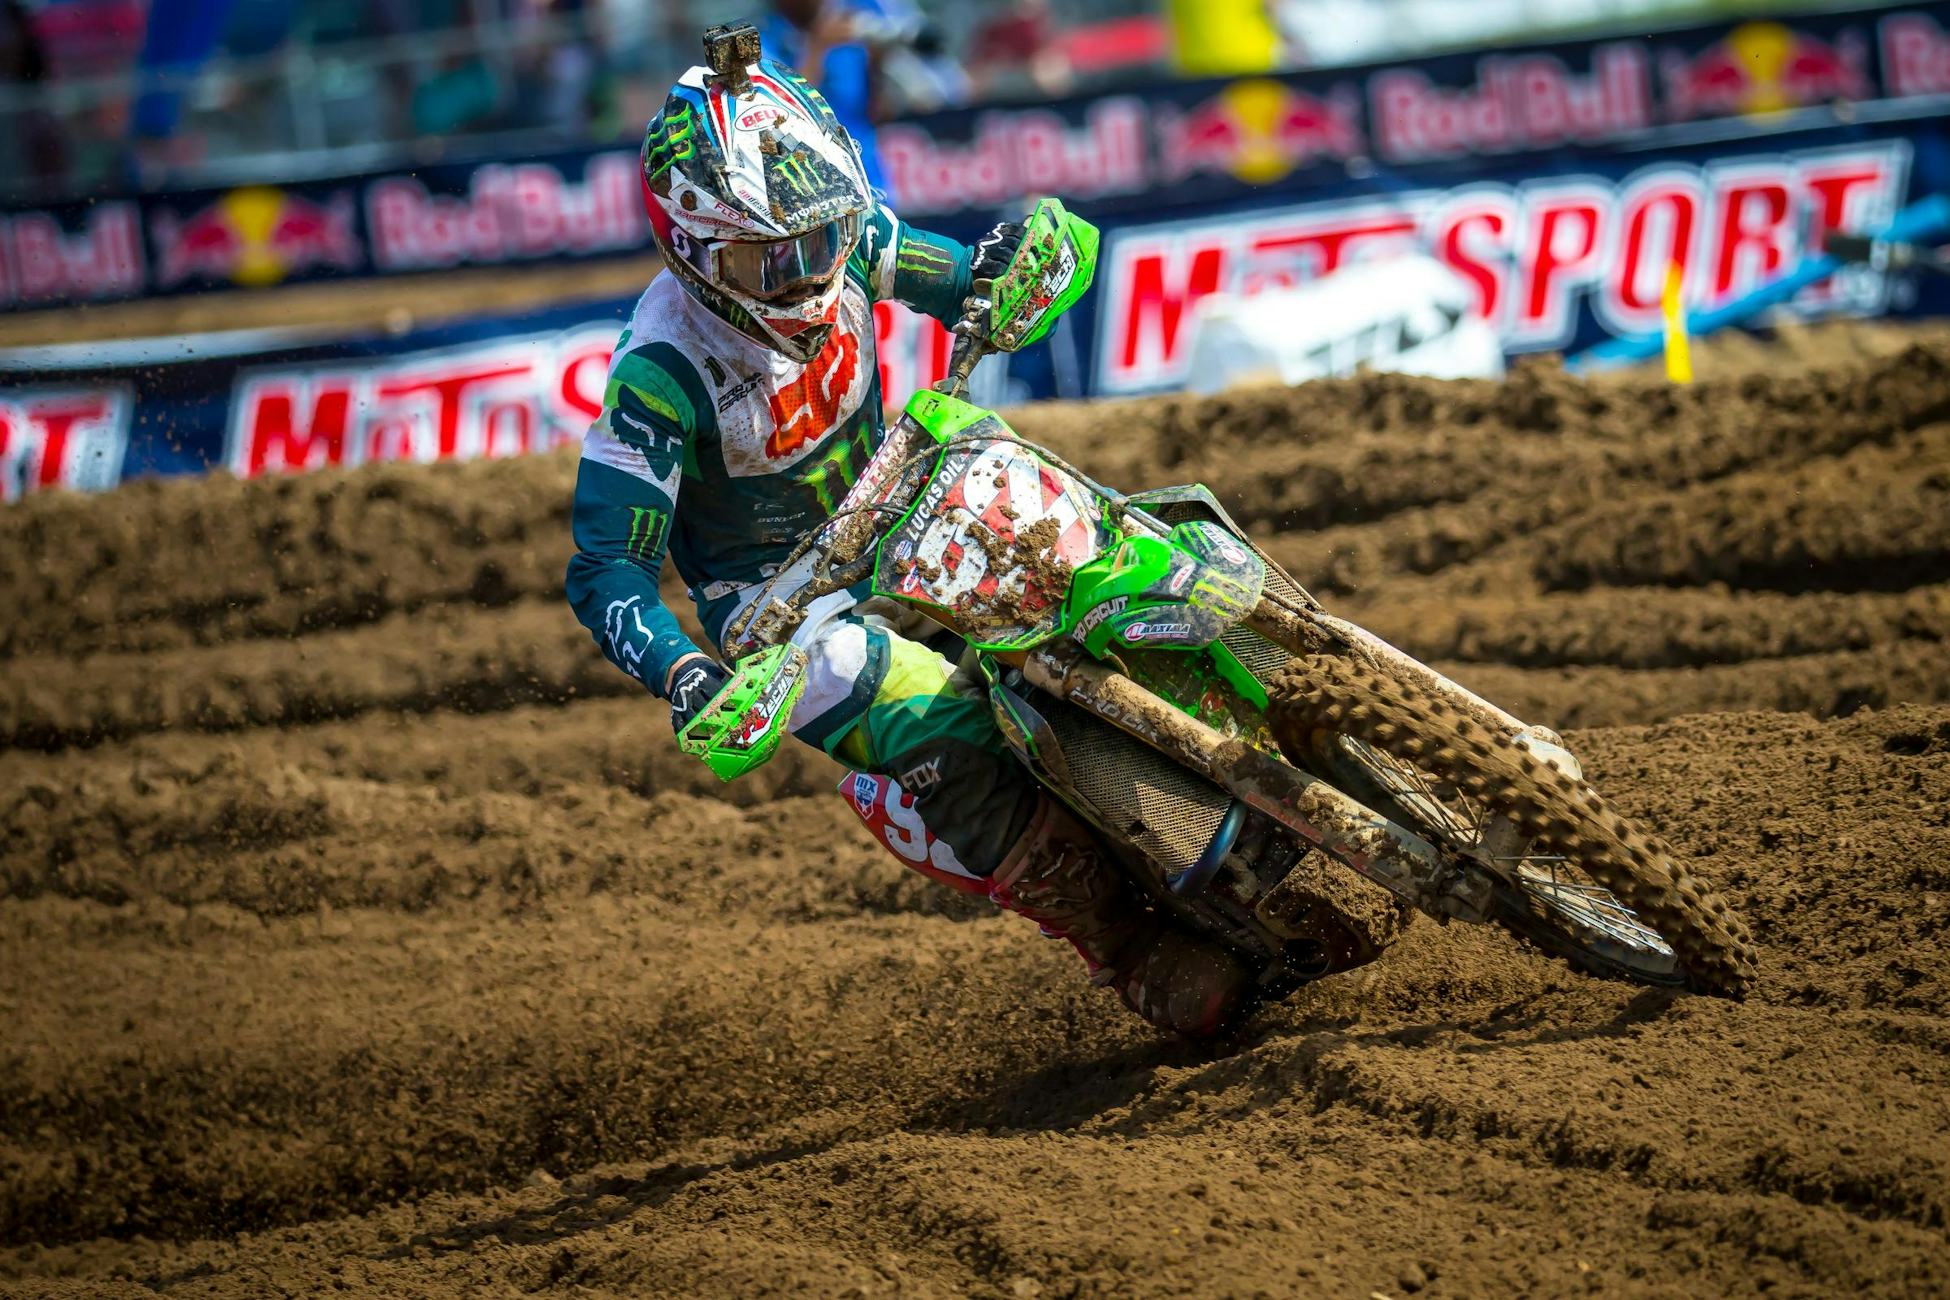 Cianciarulo's 5-2 moto scores were good enough for second overall.